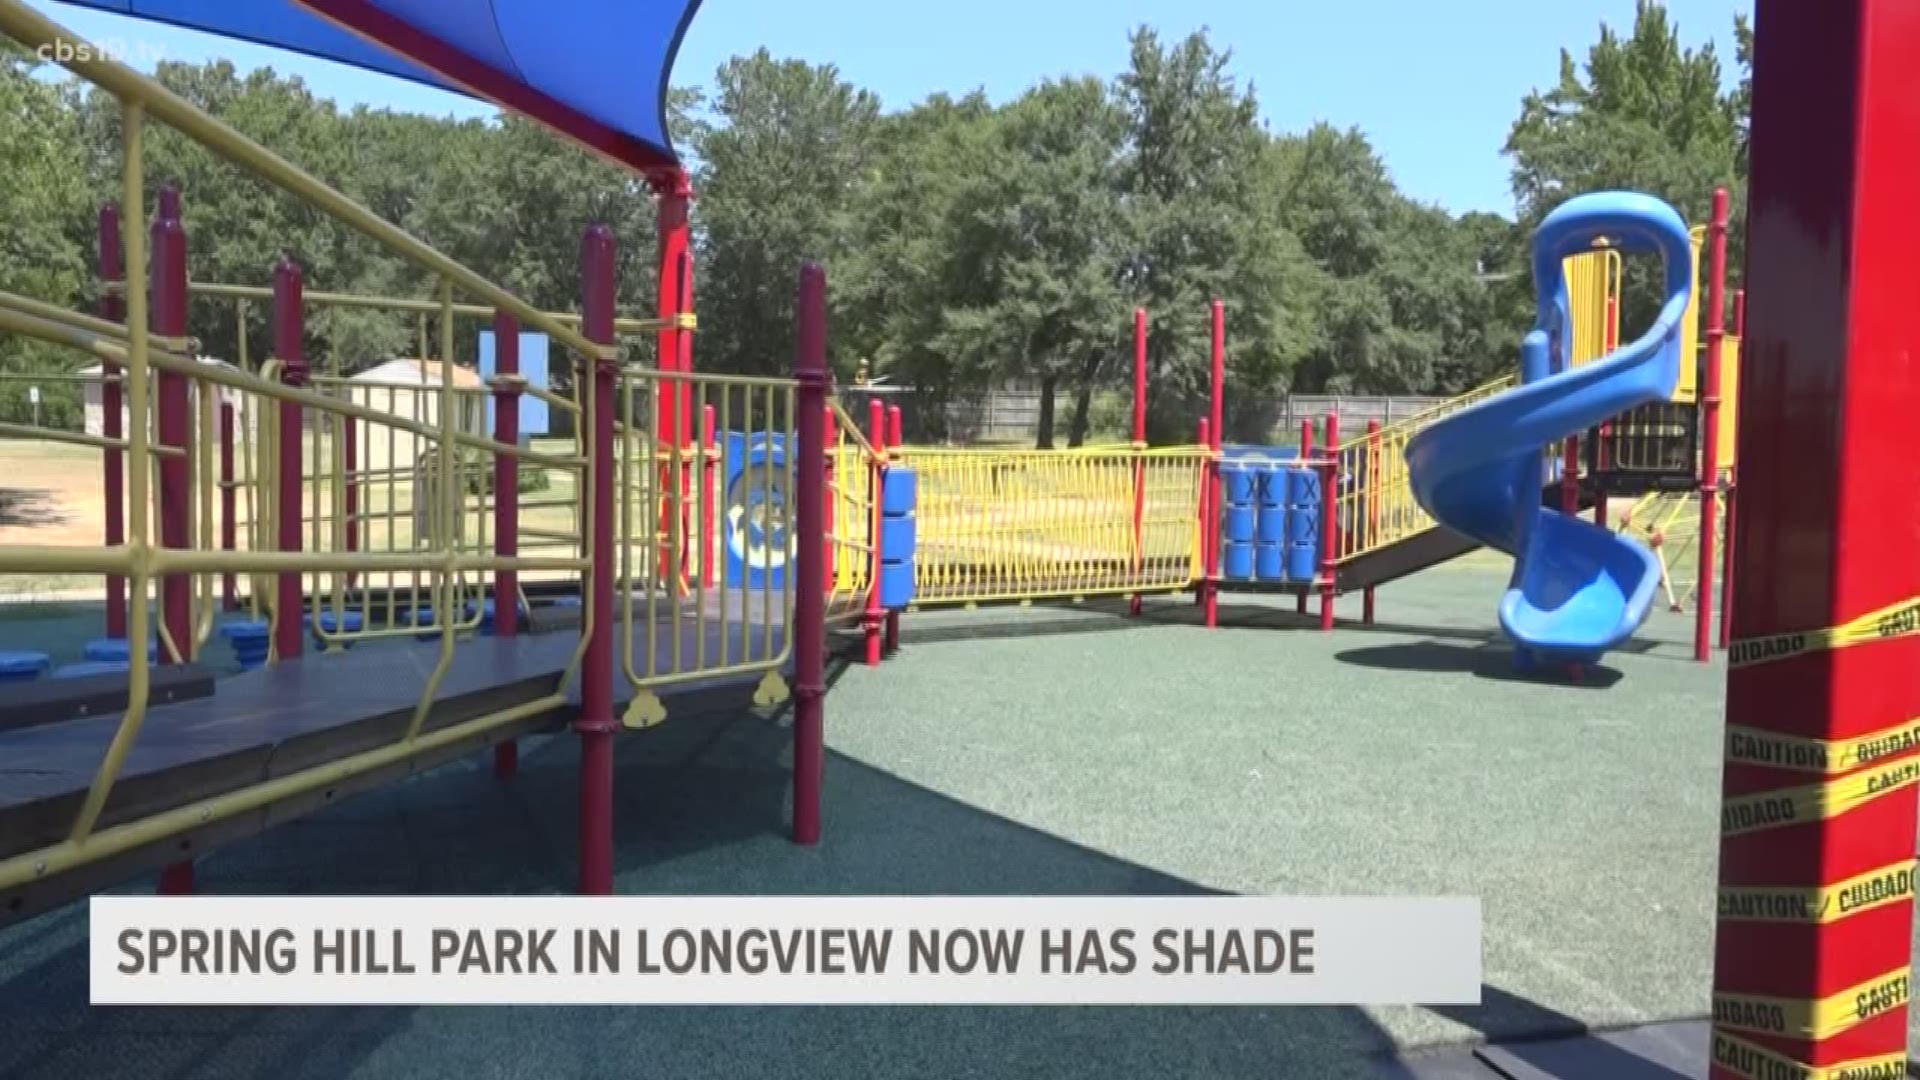 Last week a shade was put over Longview’s Spring Hill Park’s playground, making it easier for kids to have fun all day long.